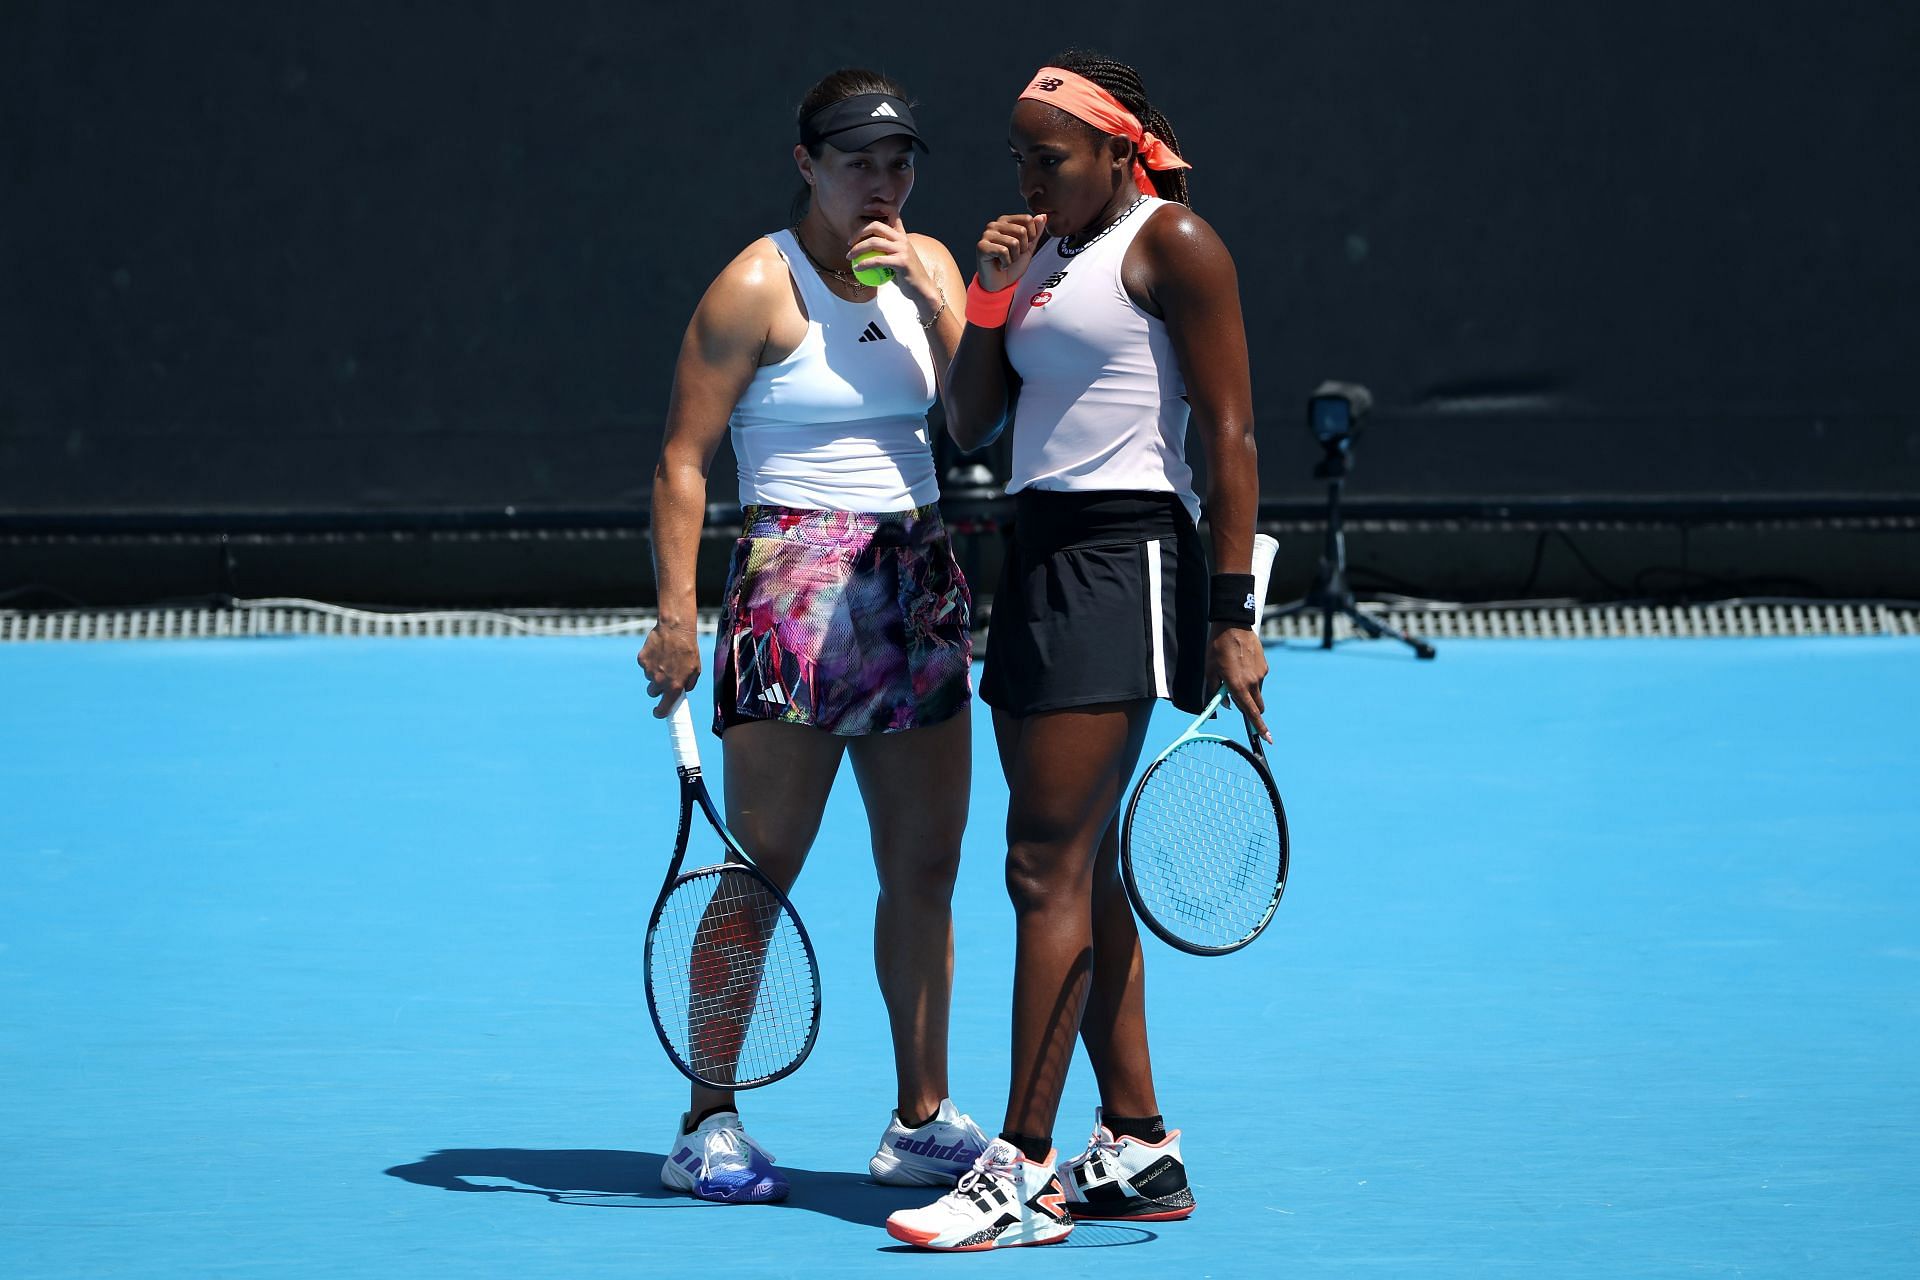 Jessica Pegula and Coco Gauff pictured at the 2023 Australian Open - Day 6